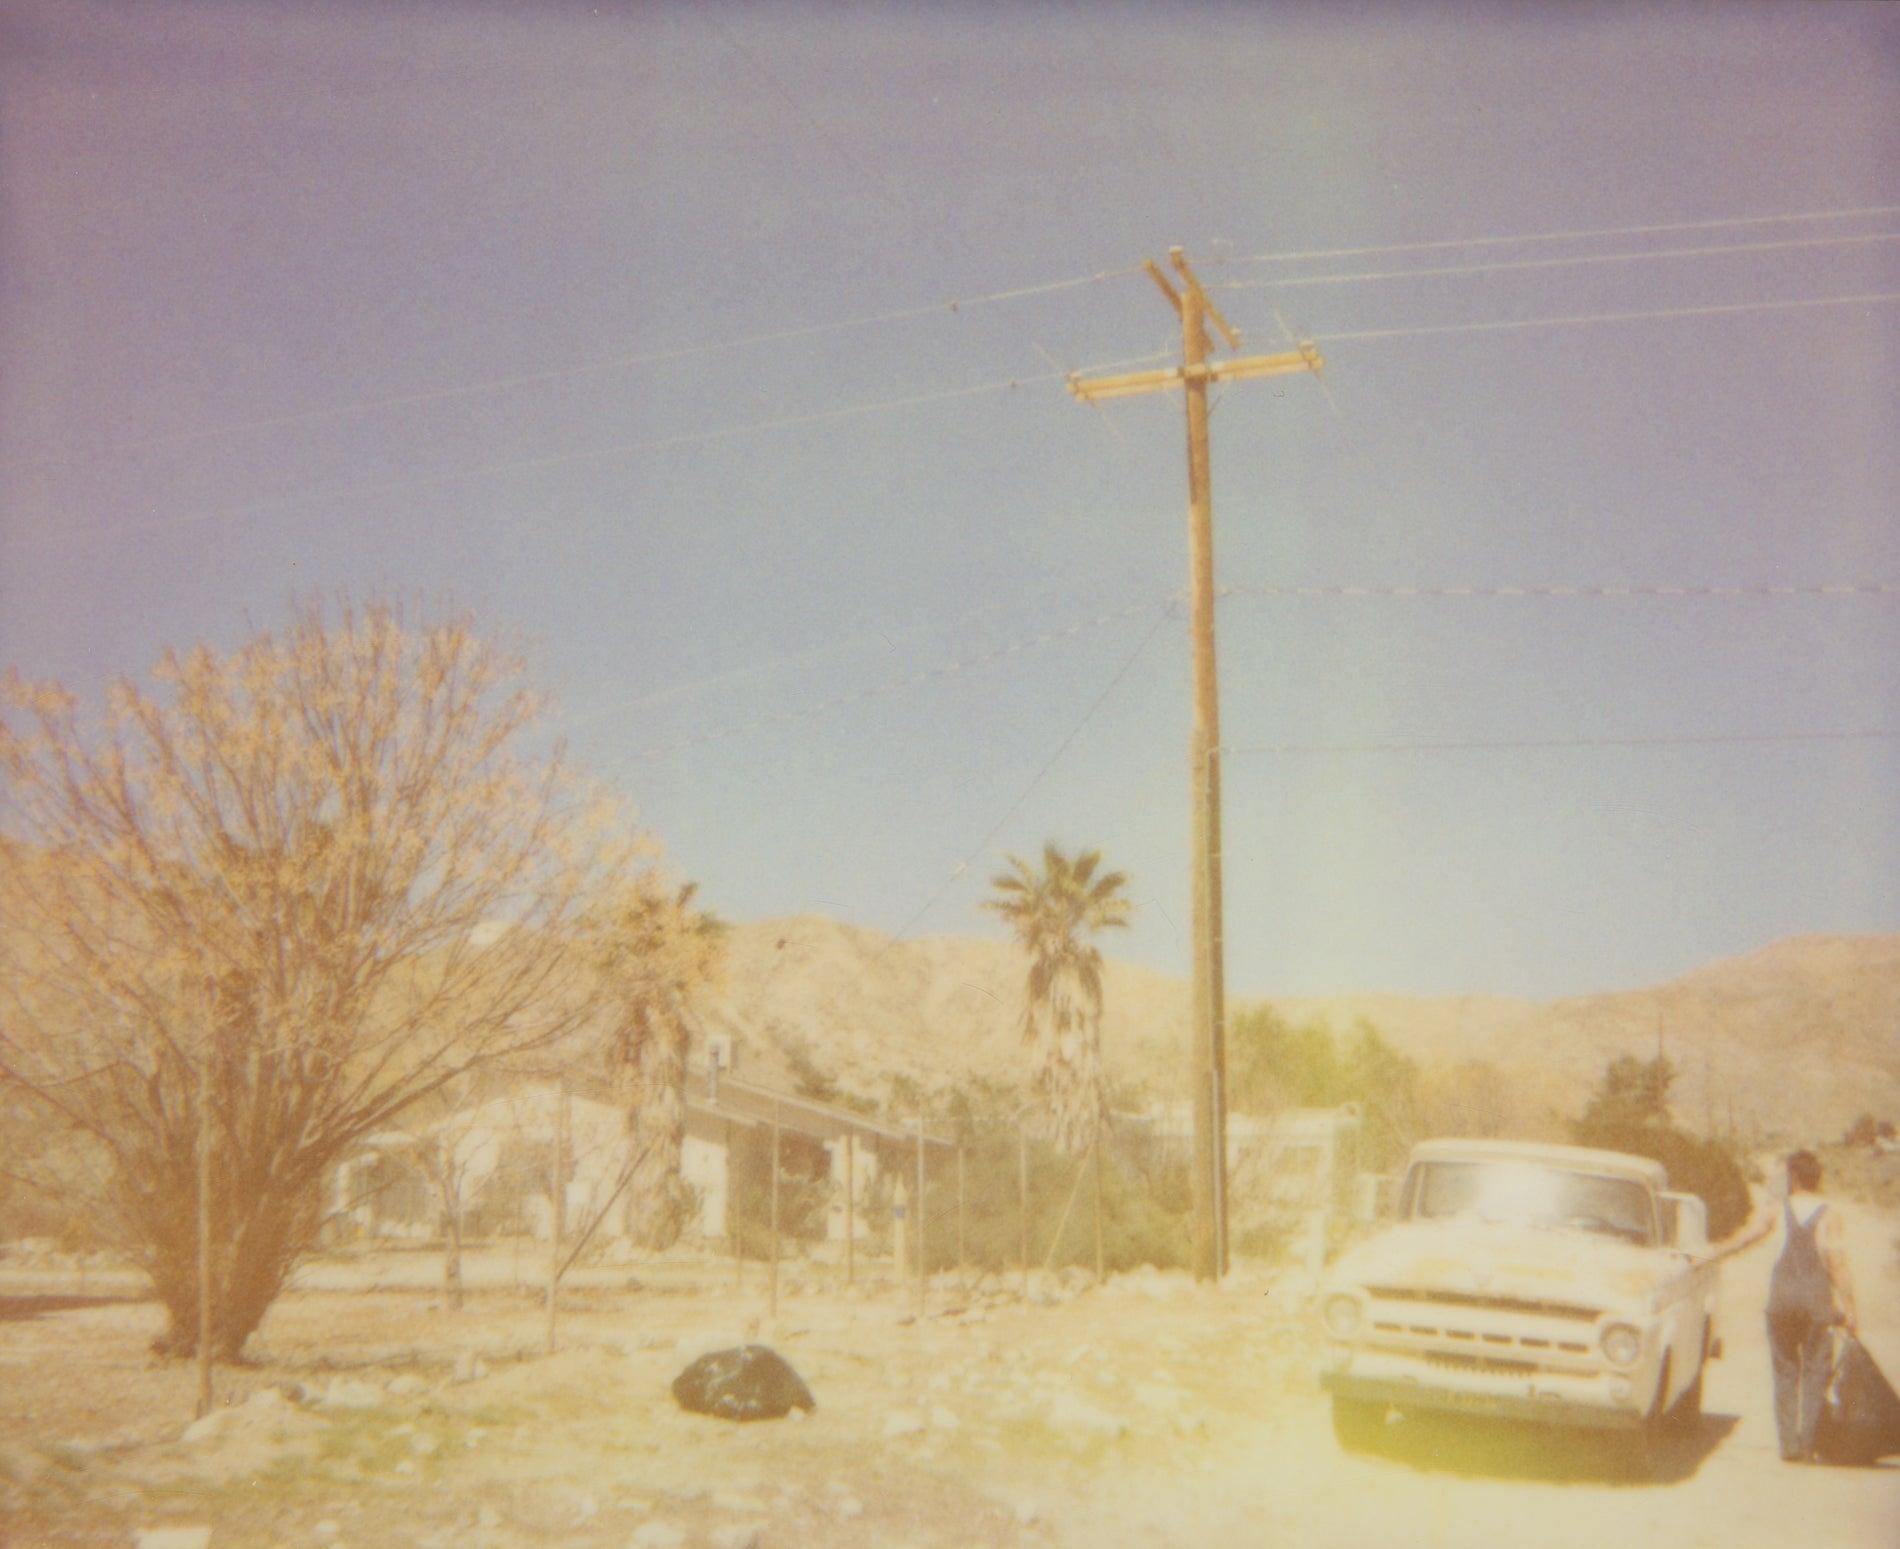 Stefanie Schneider Color Photograph - North Star Trail (The Girl behind the White Picket Fence) - Polaroid, Color